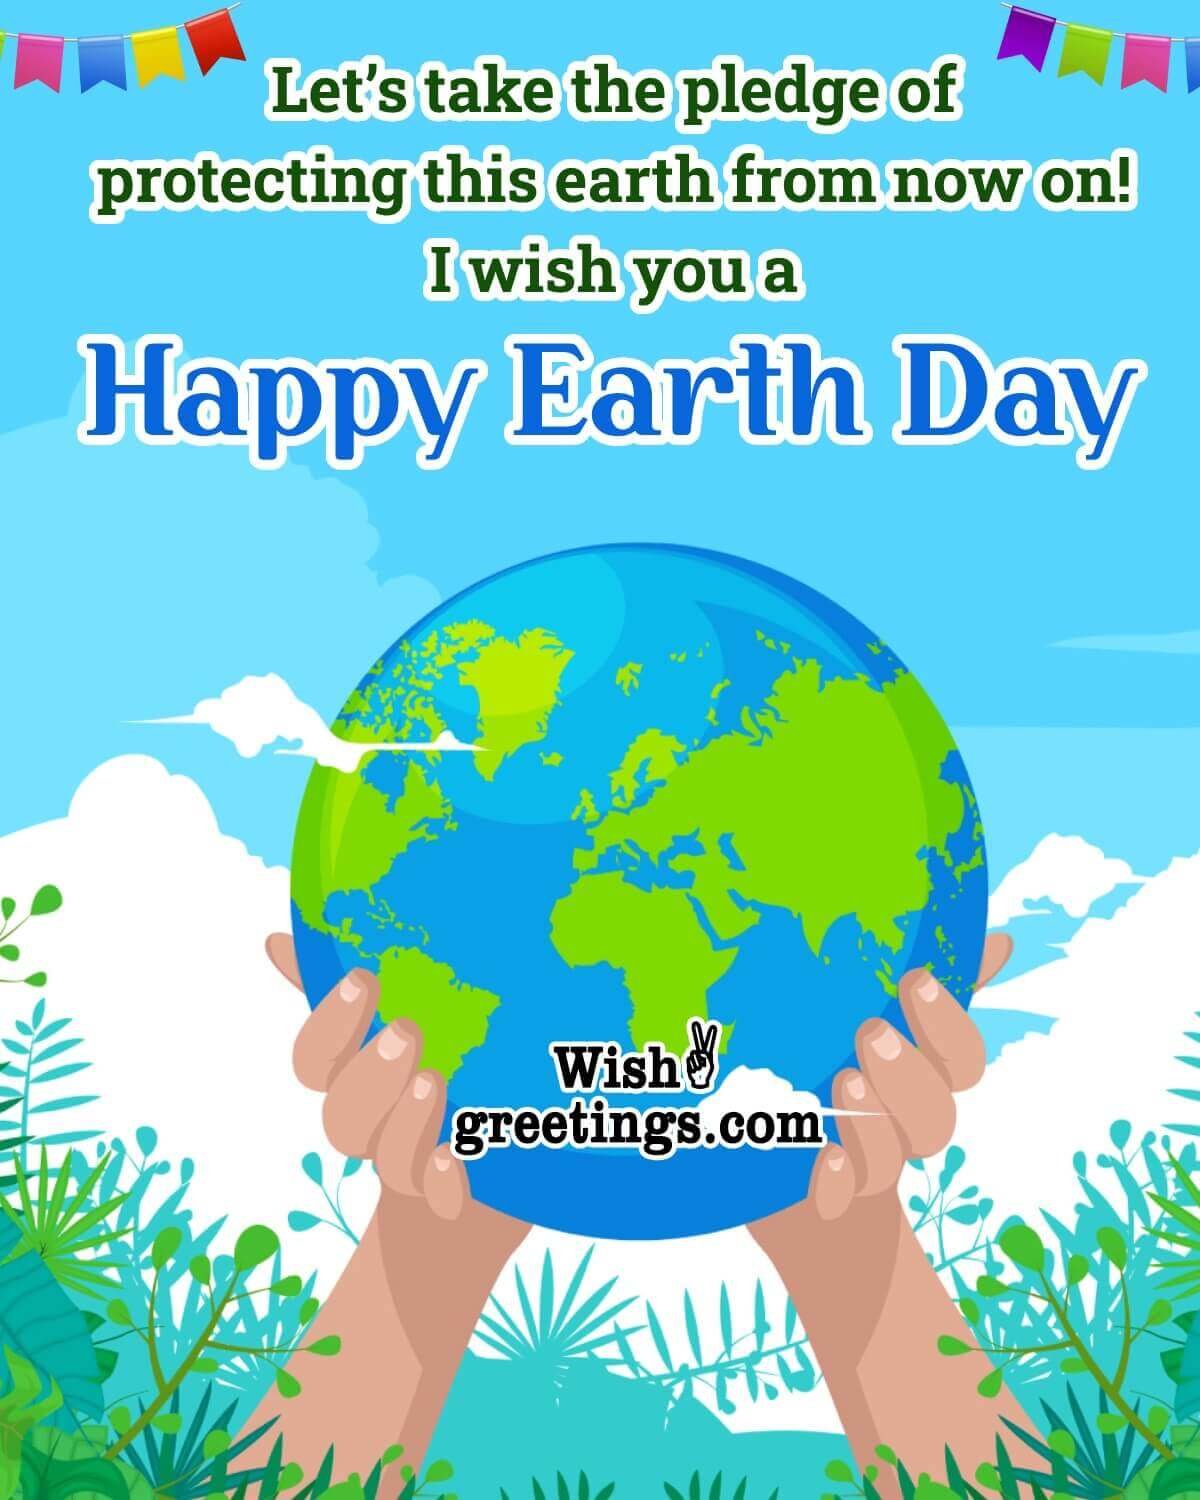 Happy Earth Day Message Photo